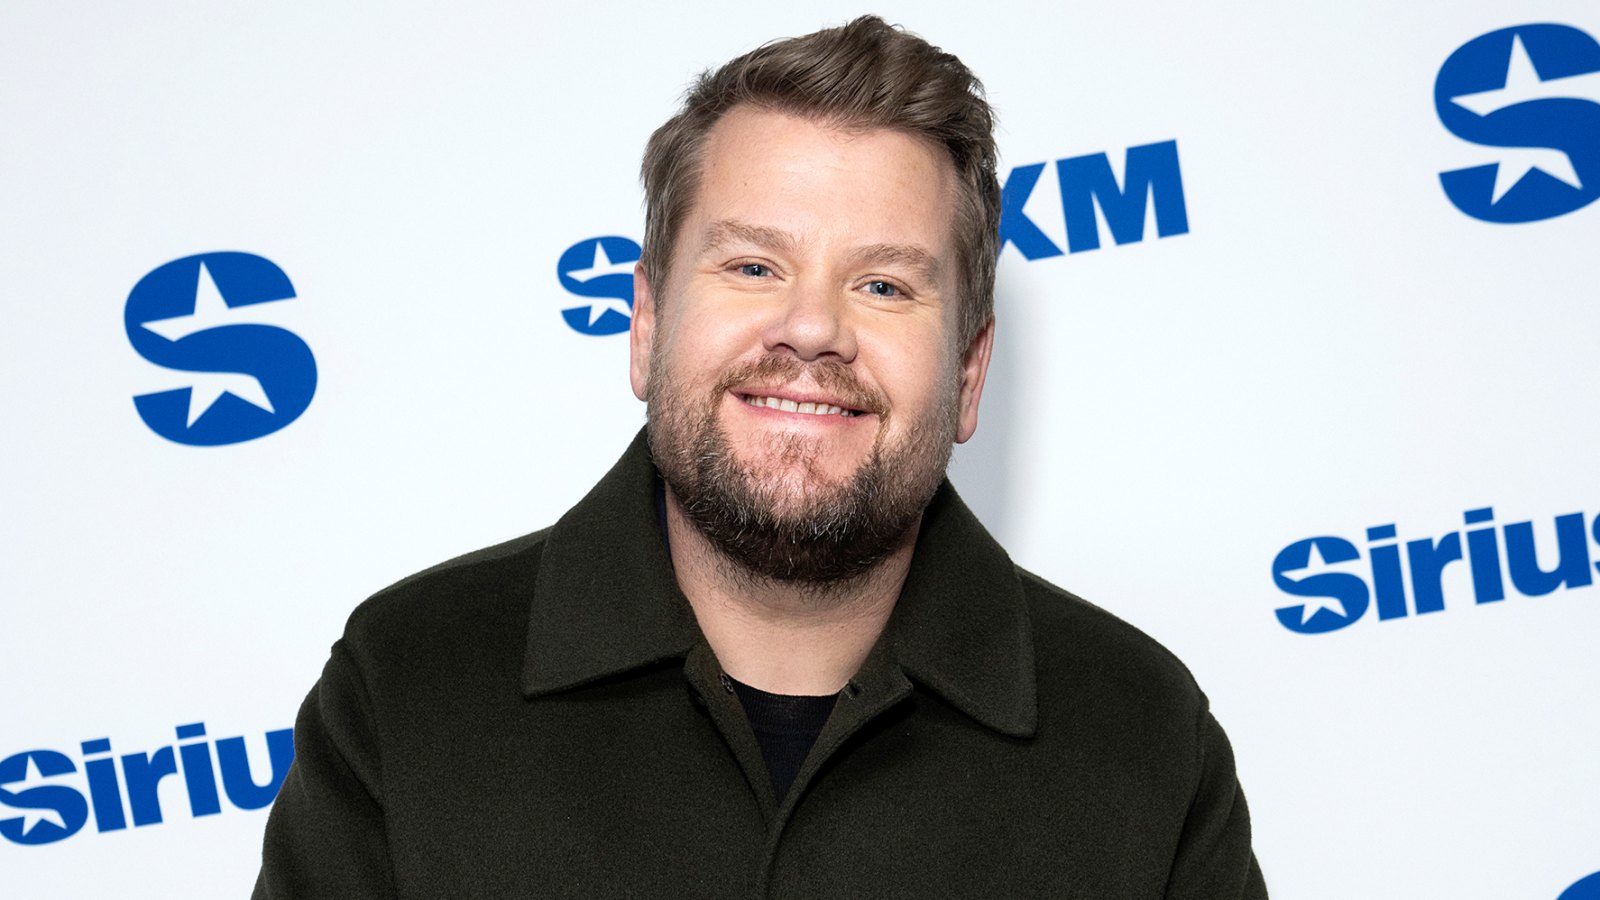 James Corden Says 'No One Believes' He Wasn't Fired from Late Night Gig